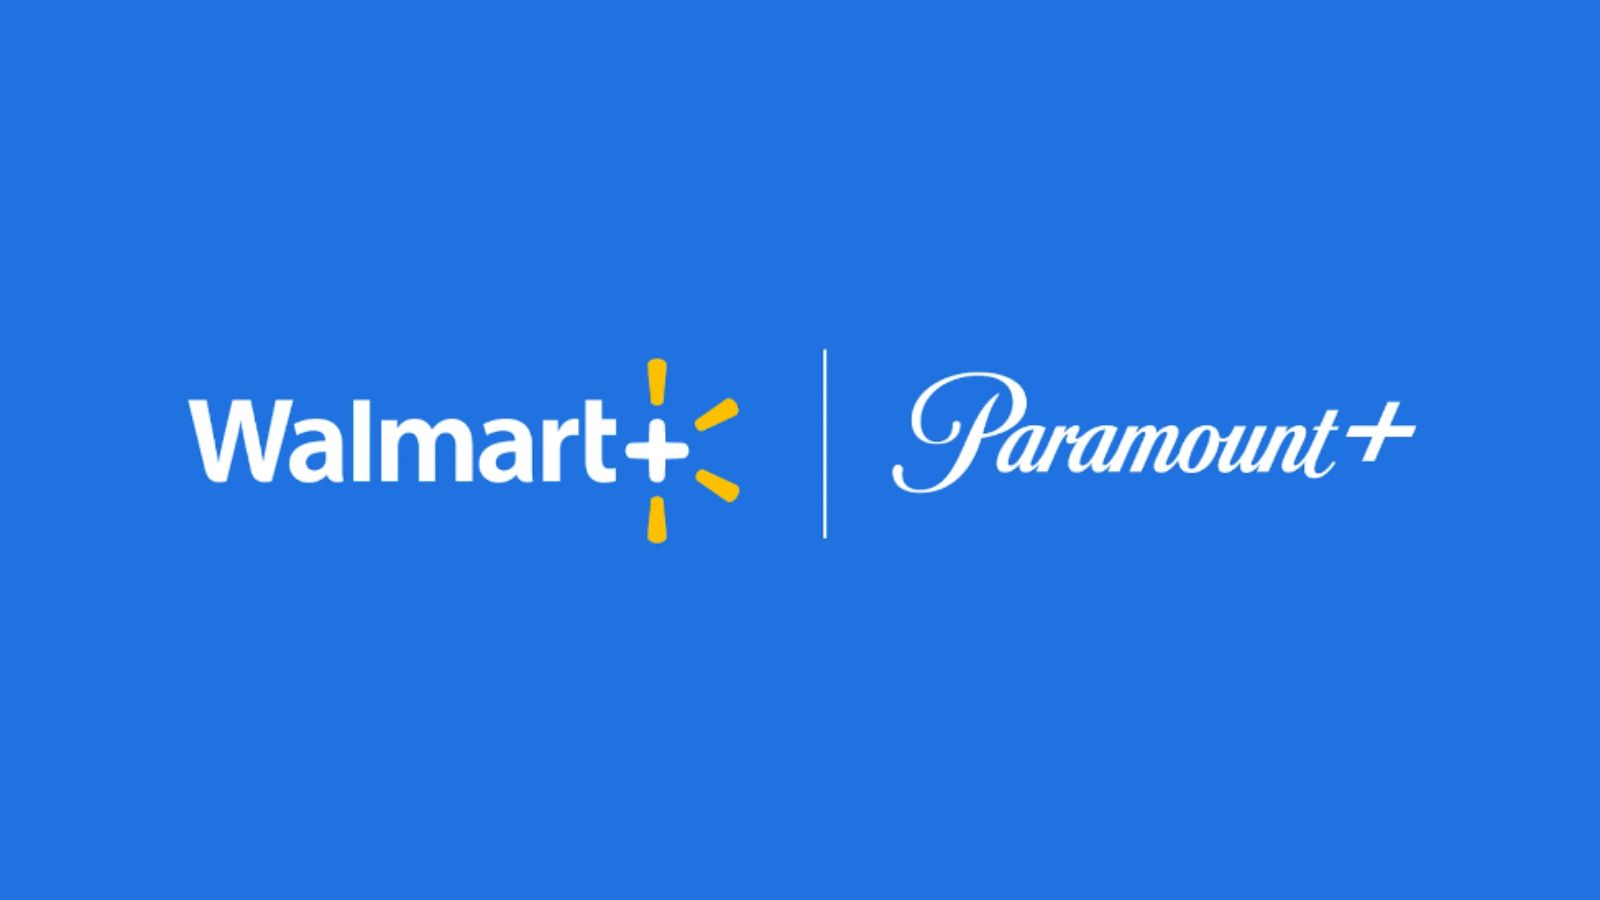 (Now Live) Amex Platinum cardholders will get Paramount+ for free with Walmart+